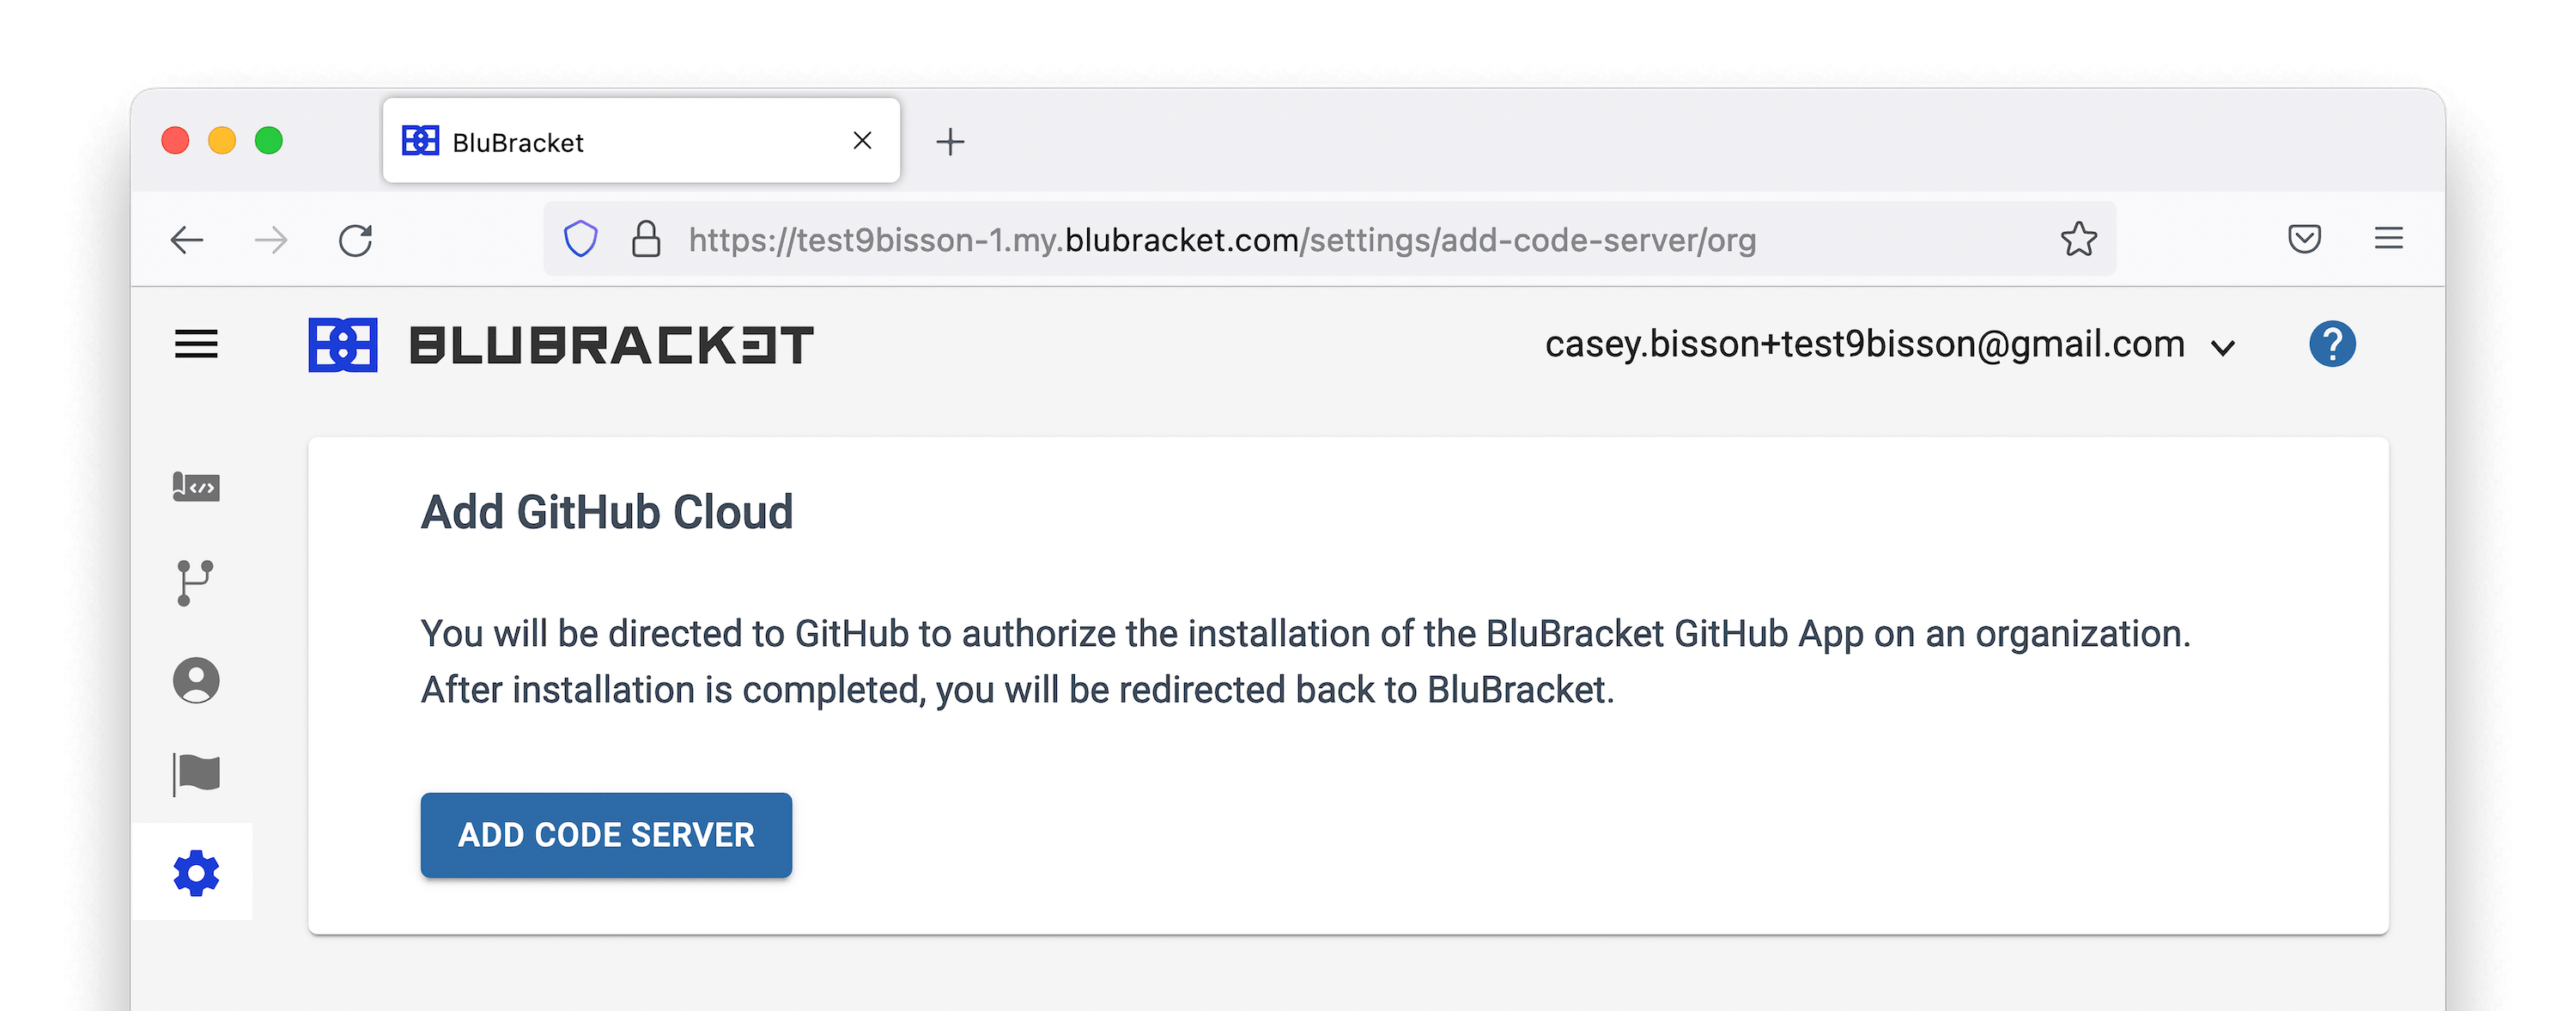 Additional details about how to add a GitHub Cloud code server to BluBracket.